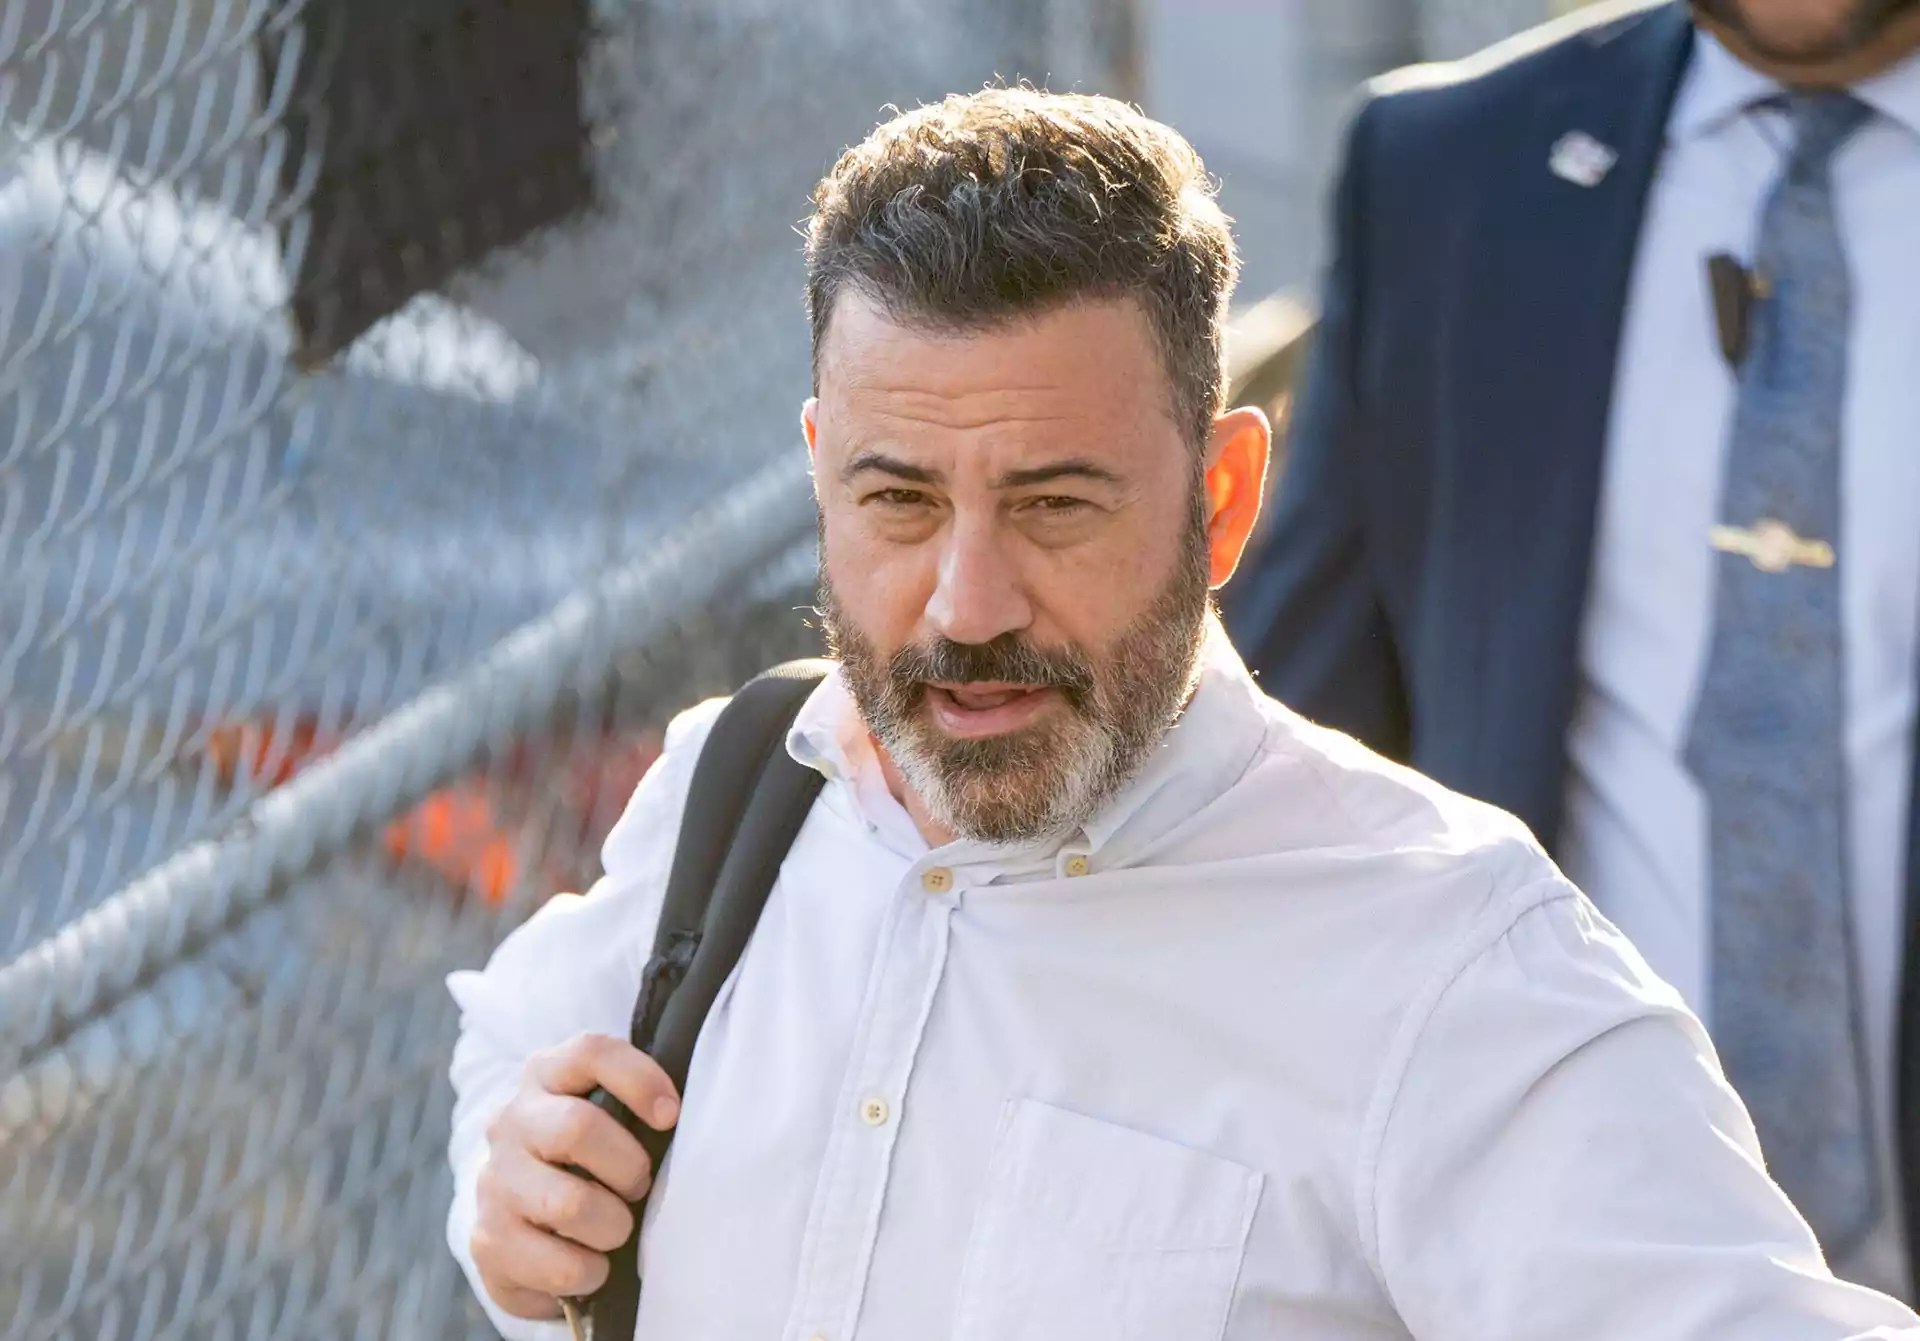 Shocking Rumor Has Jimmy Kimmel Been Fired from His ABC Show